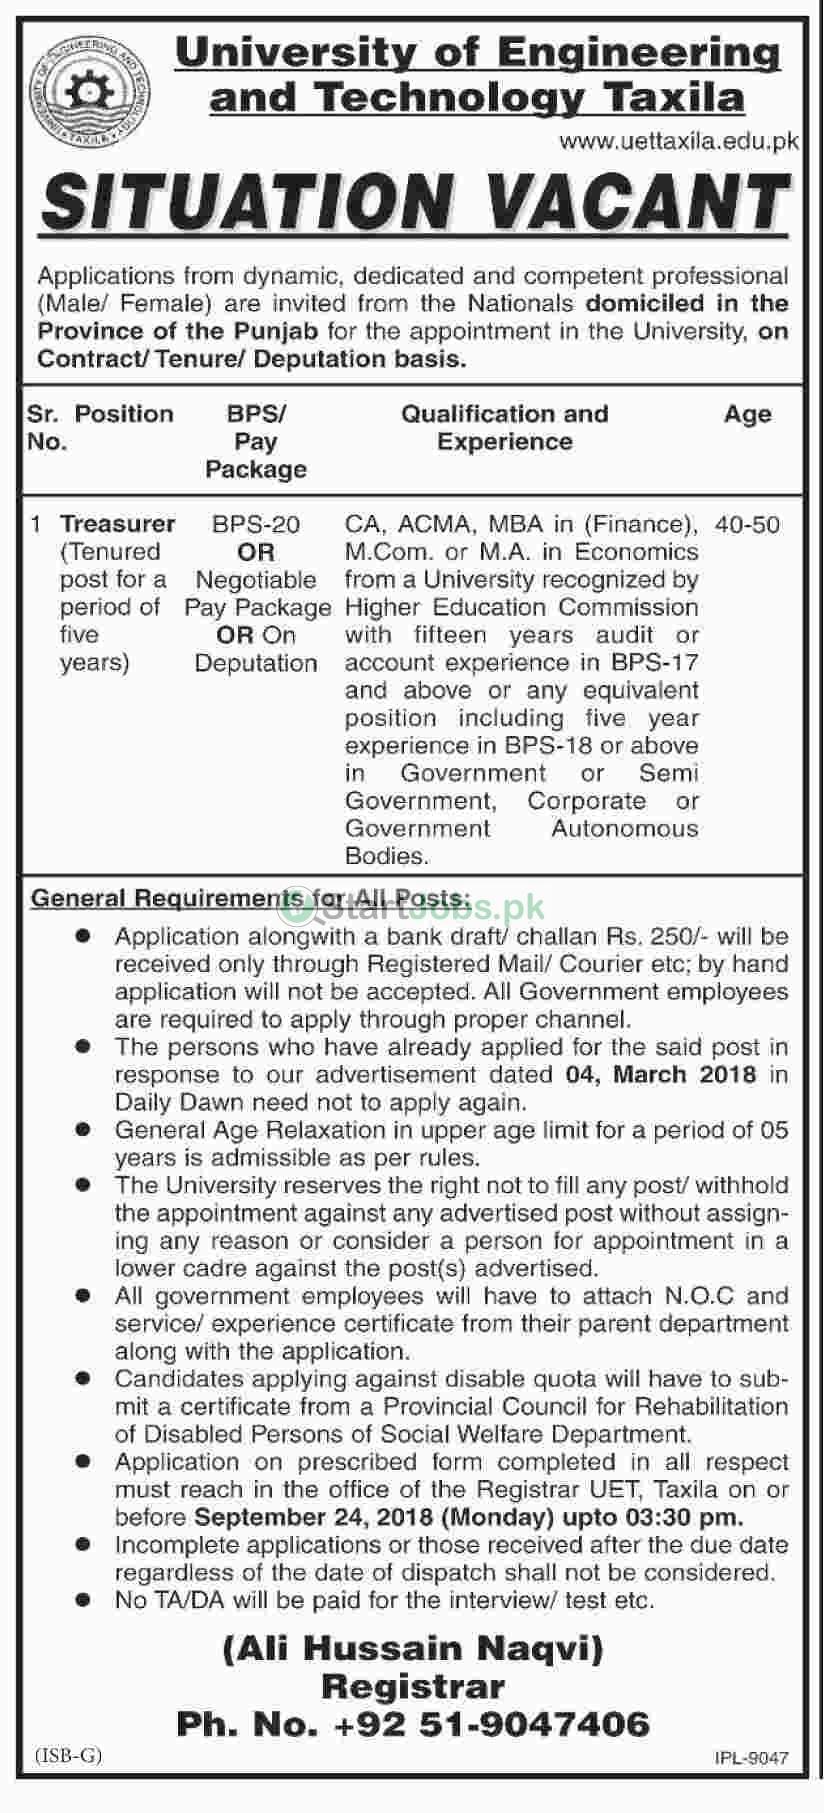 University of Engineering And Technology Jobs 2018 September Taxila